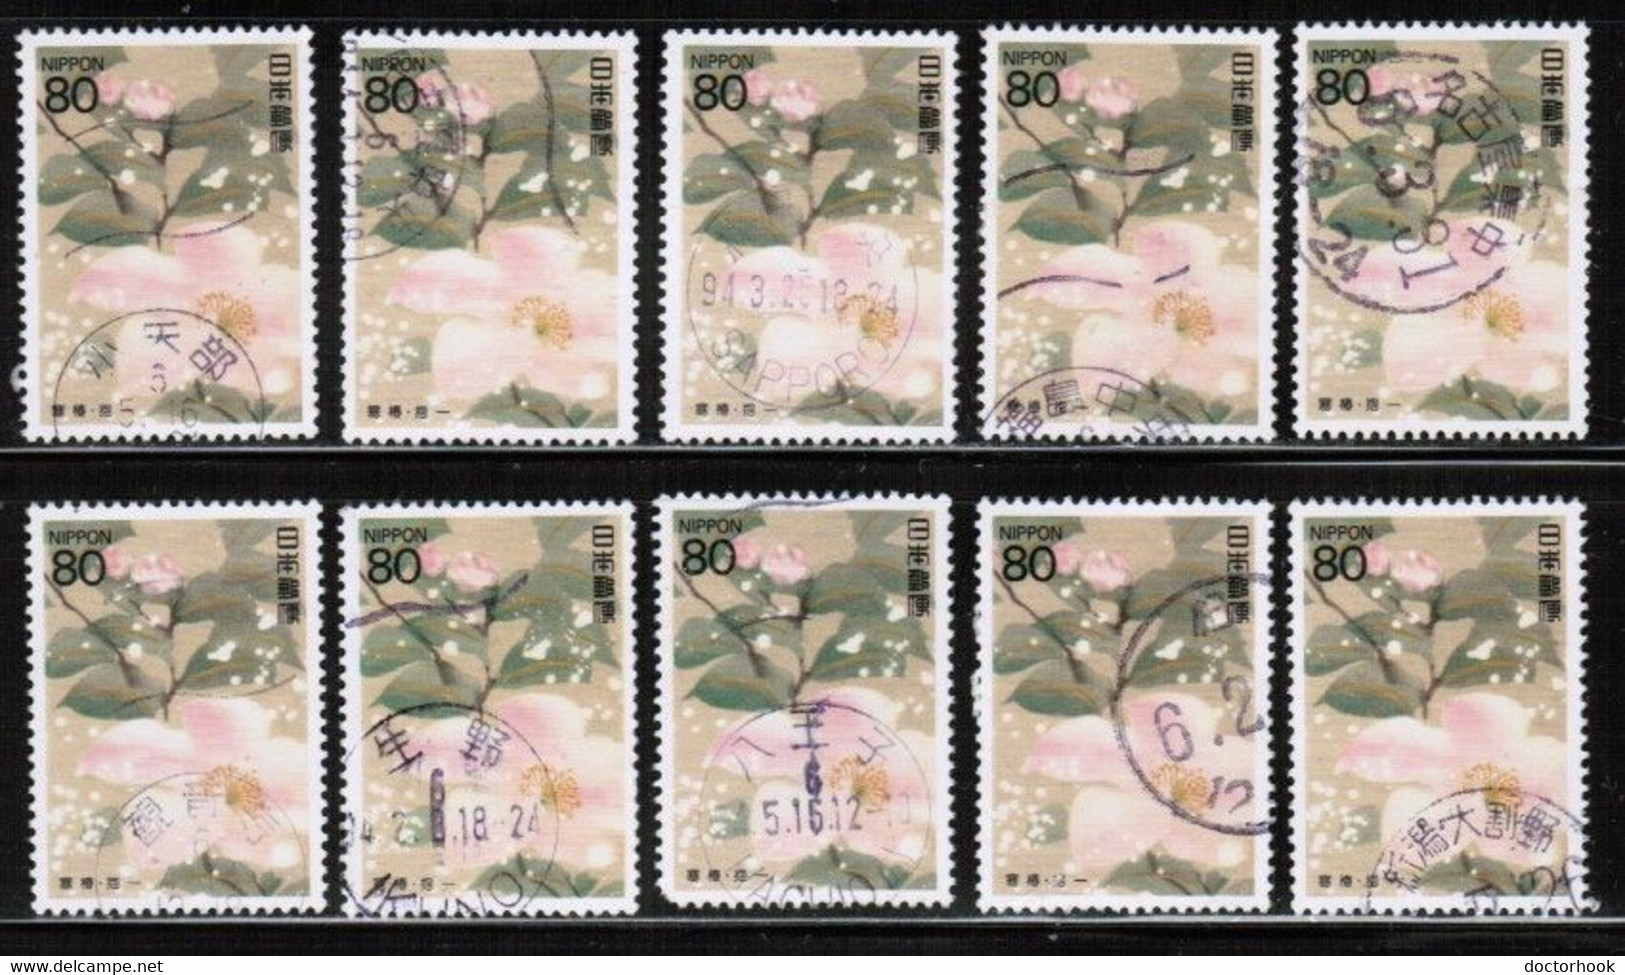 JAPAN   Scott # 2183 USED WHOLESALE LOT OF 10 (CONDITION AS PER SCAN) (WH-604) - Collections, Lots & Series